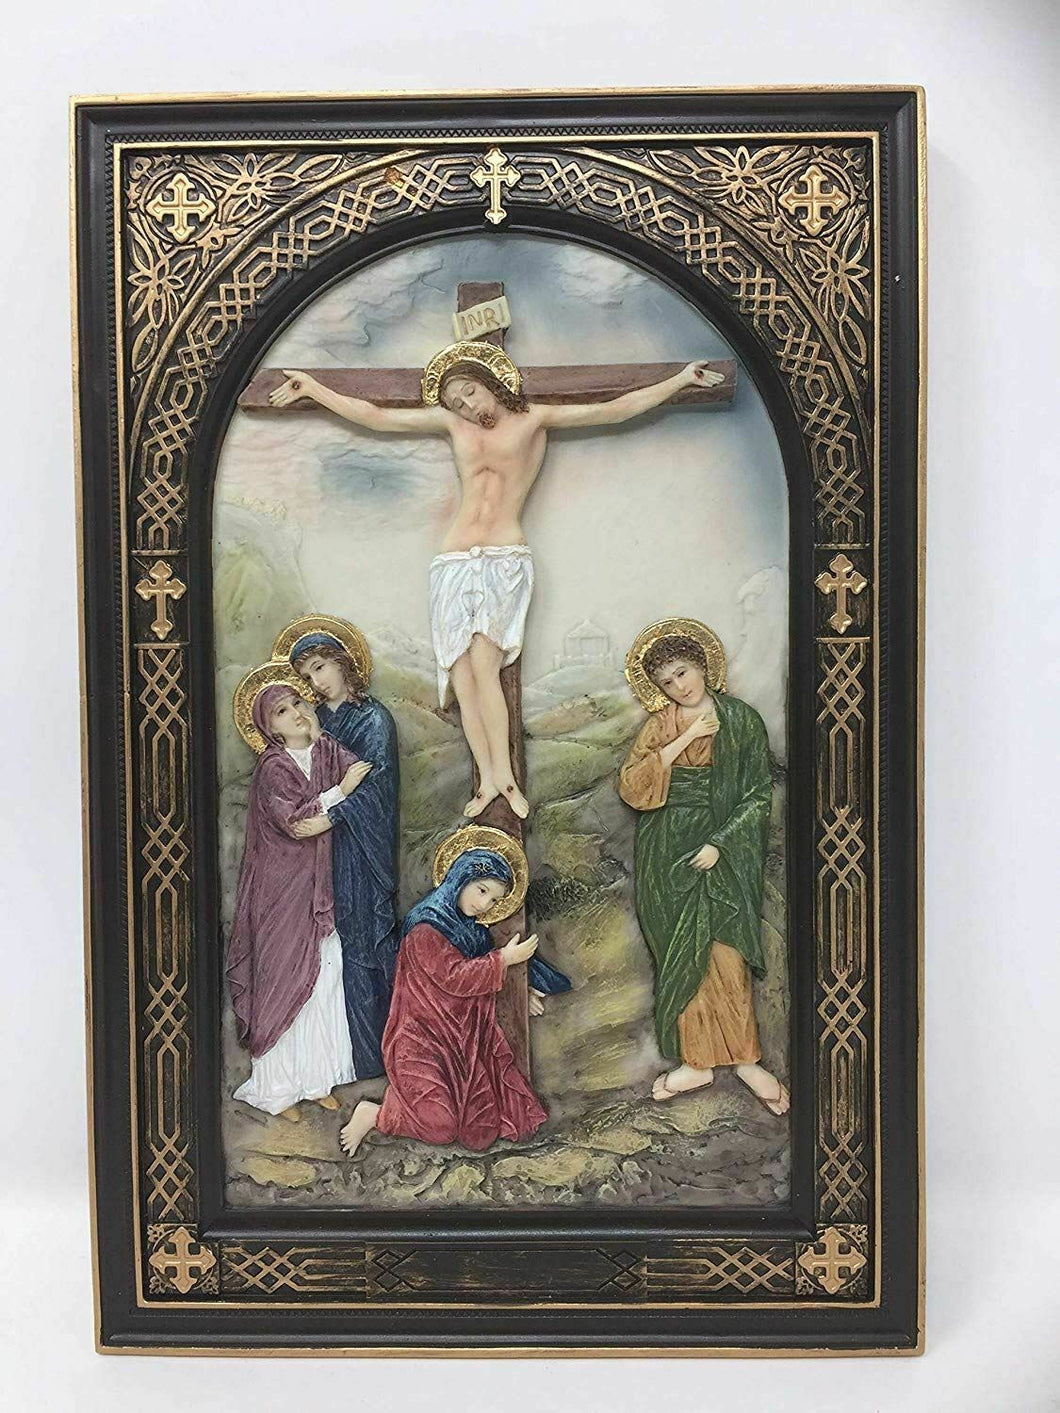 The Crucifixion of Christ Crucifix Hanging Wall Plaque Cross Religious Ornament